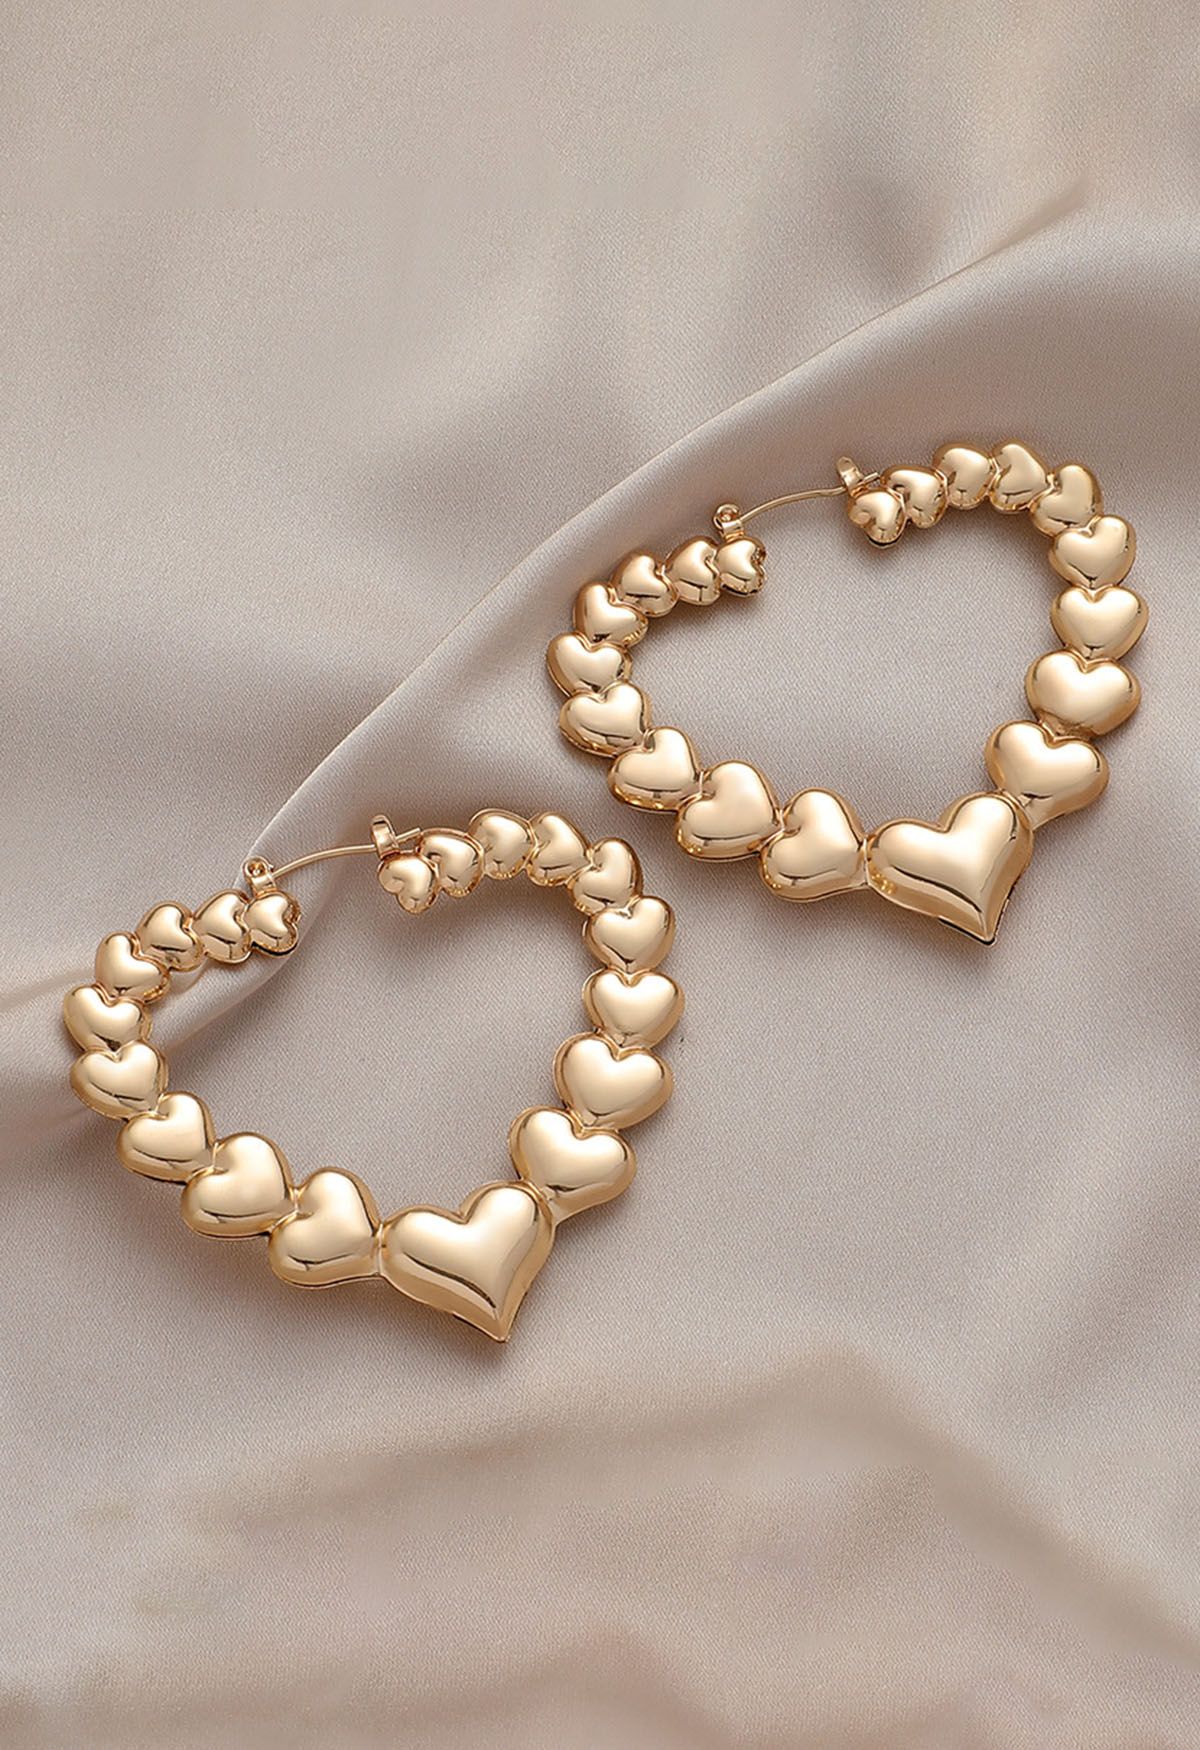 Hollow Out Metal Heart Earrings in Gold